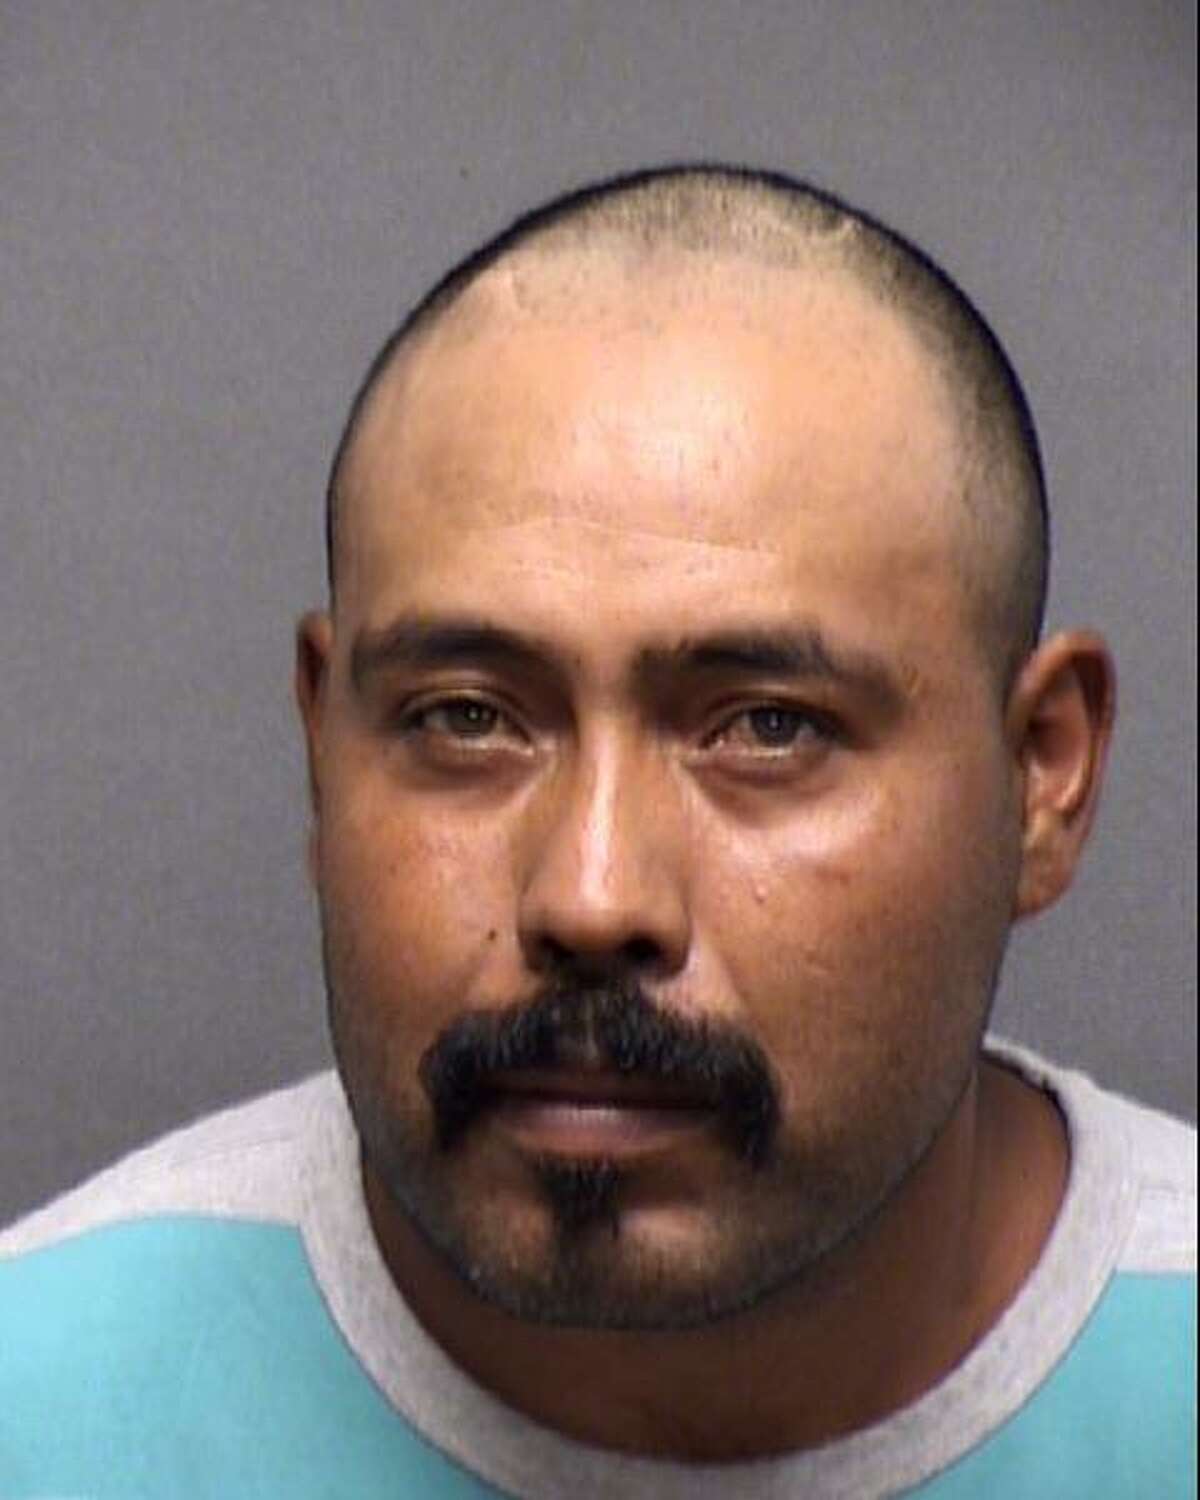 Isidro Ibarra Moreno was sentenced Sept. 28, 2021, to seven years in prison after he pleaded guilty to having child abuse materials and images of bestiality on his cellphone.